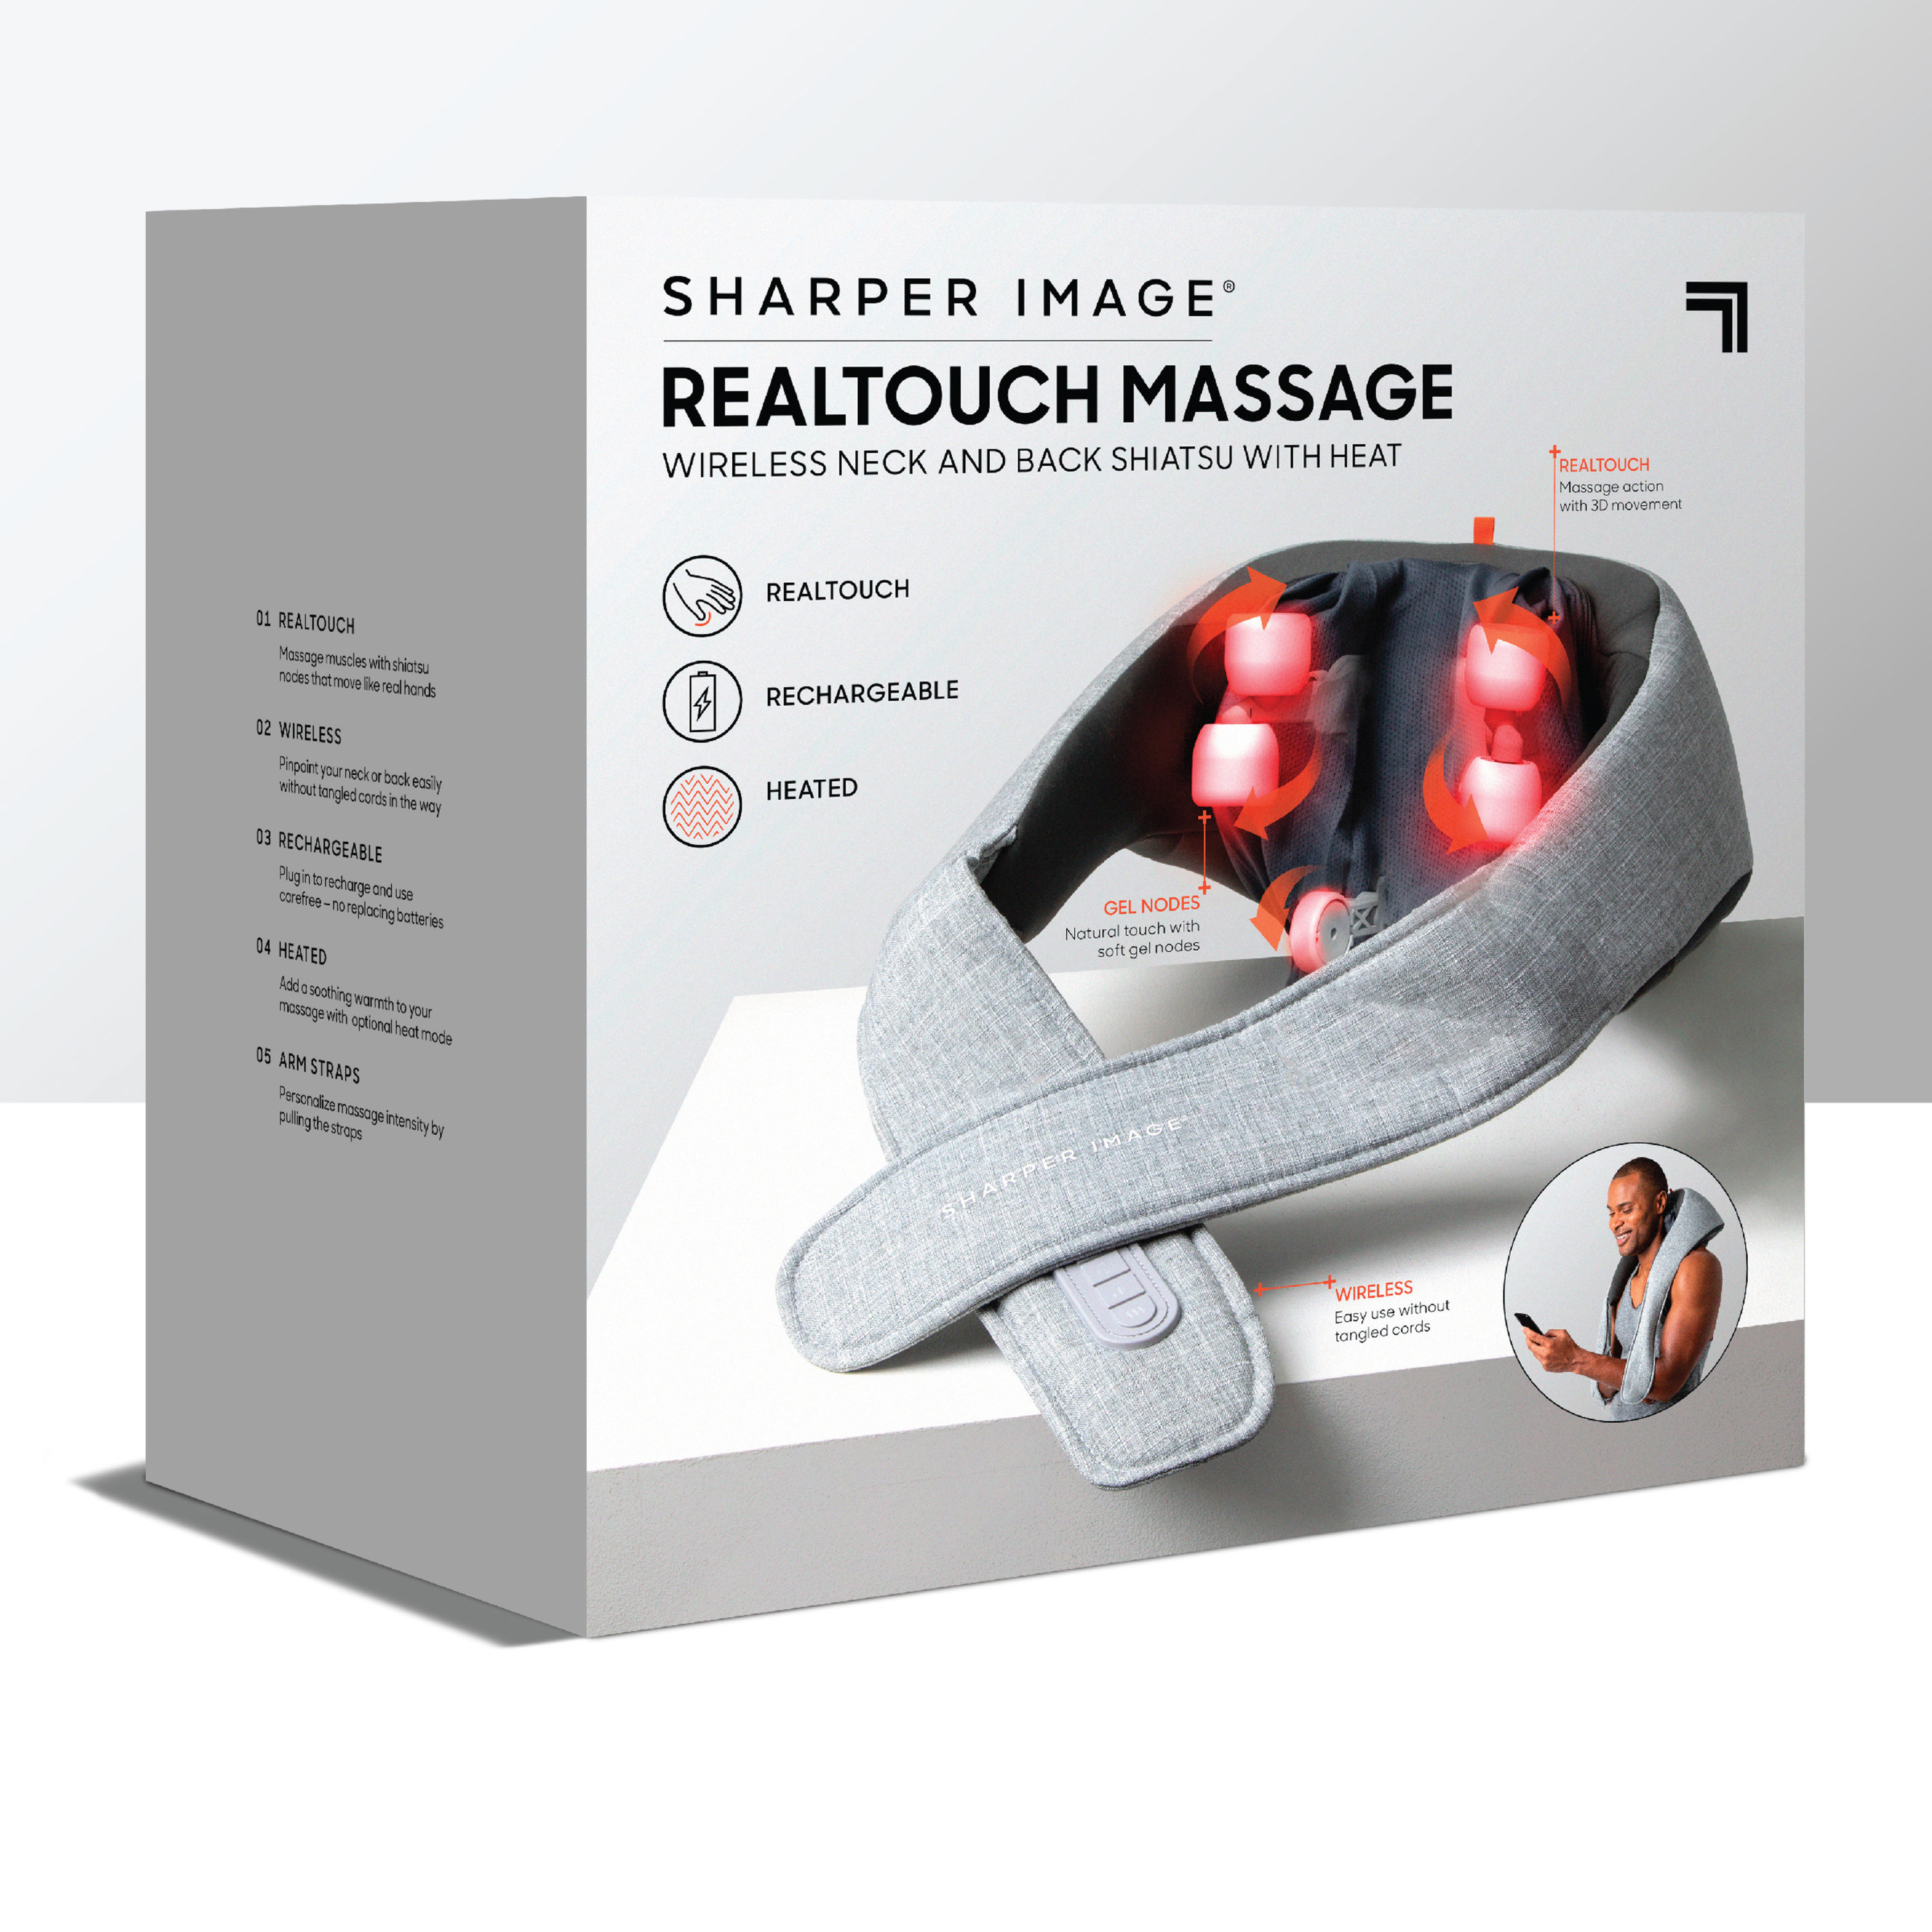 Heated Neck and Back Massager by Sharper Image @